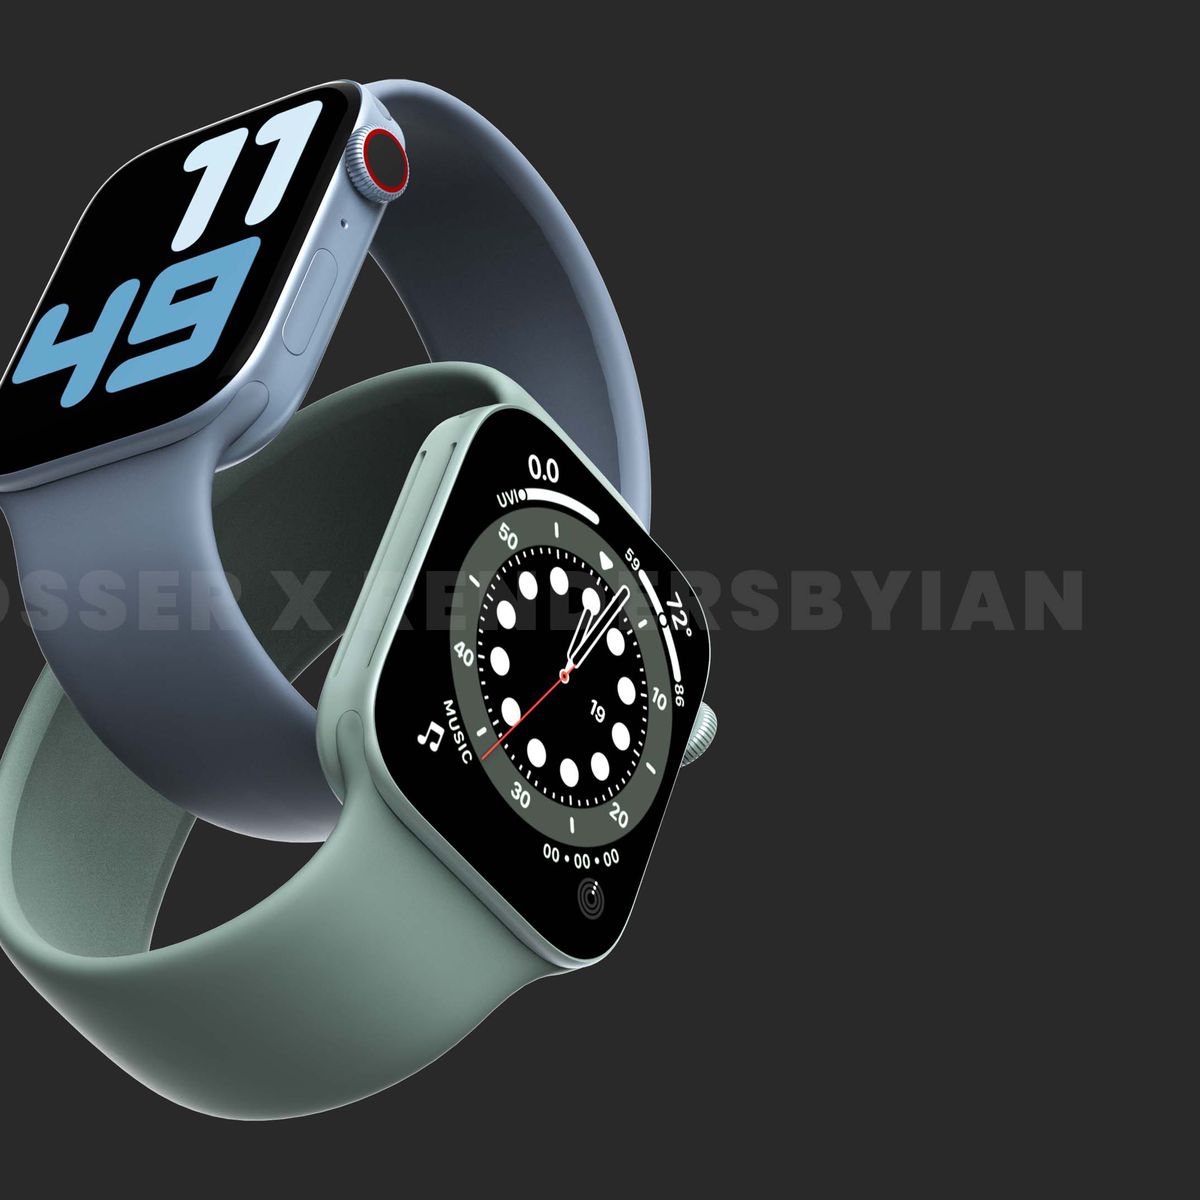 Rumor: Apple Watch Series 7 to Come in Larger 41mm and 45mm Sizes 